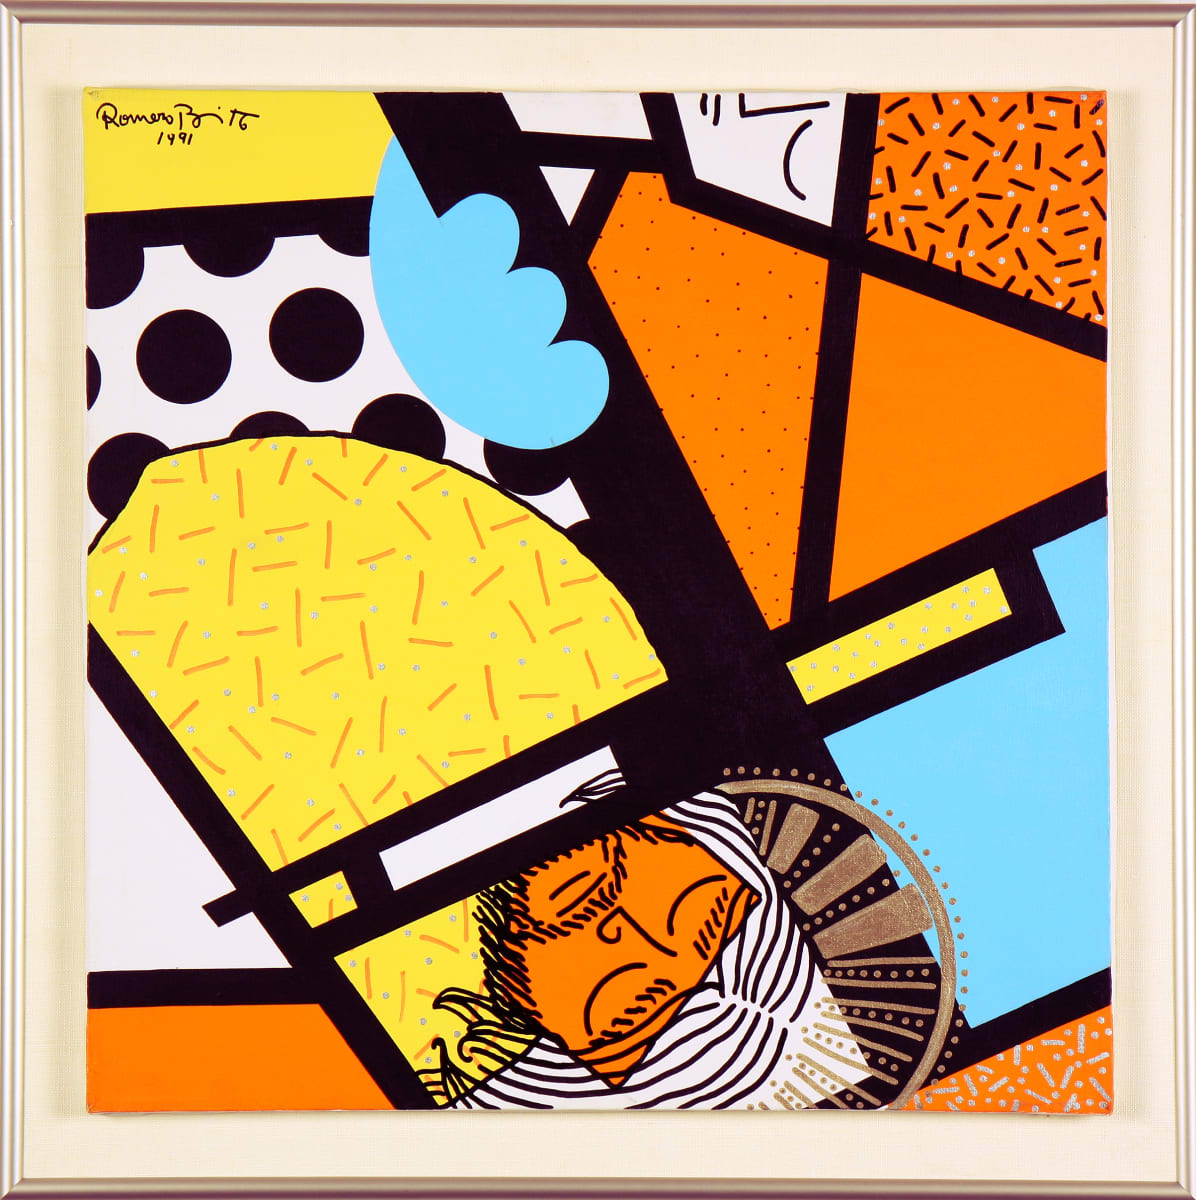 Stations of the Cross by Various  Image: Romero Brito